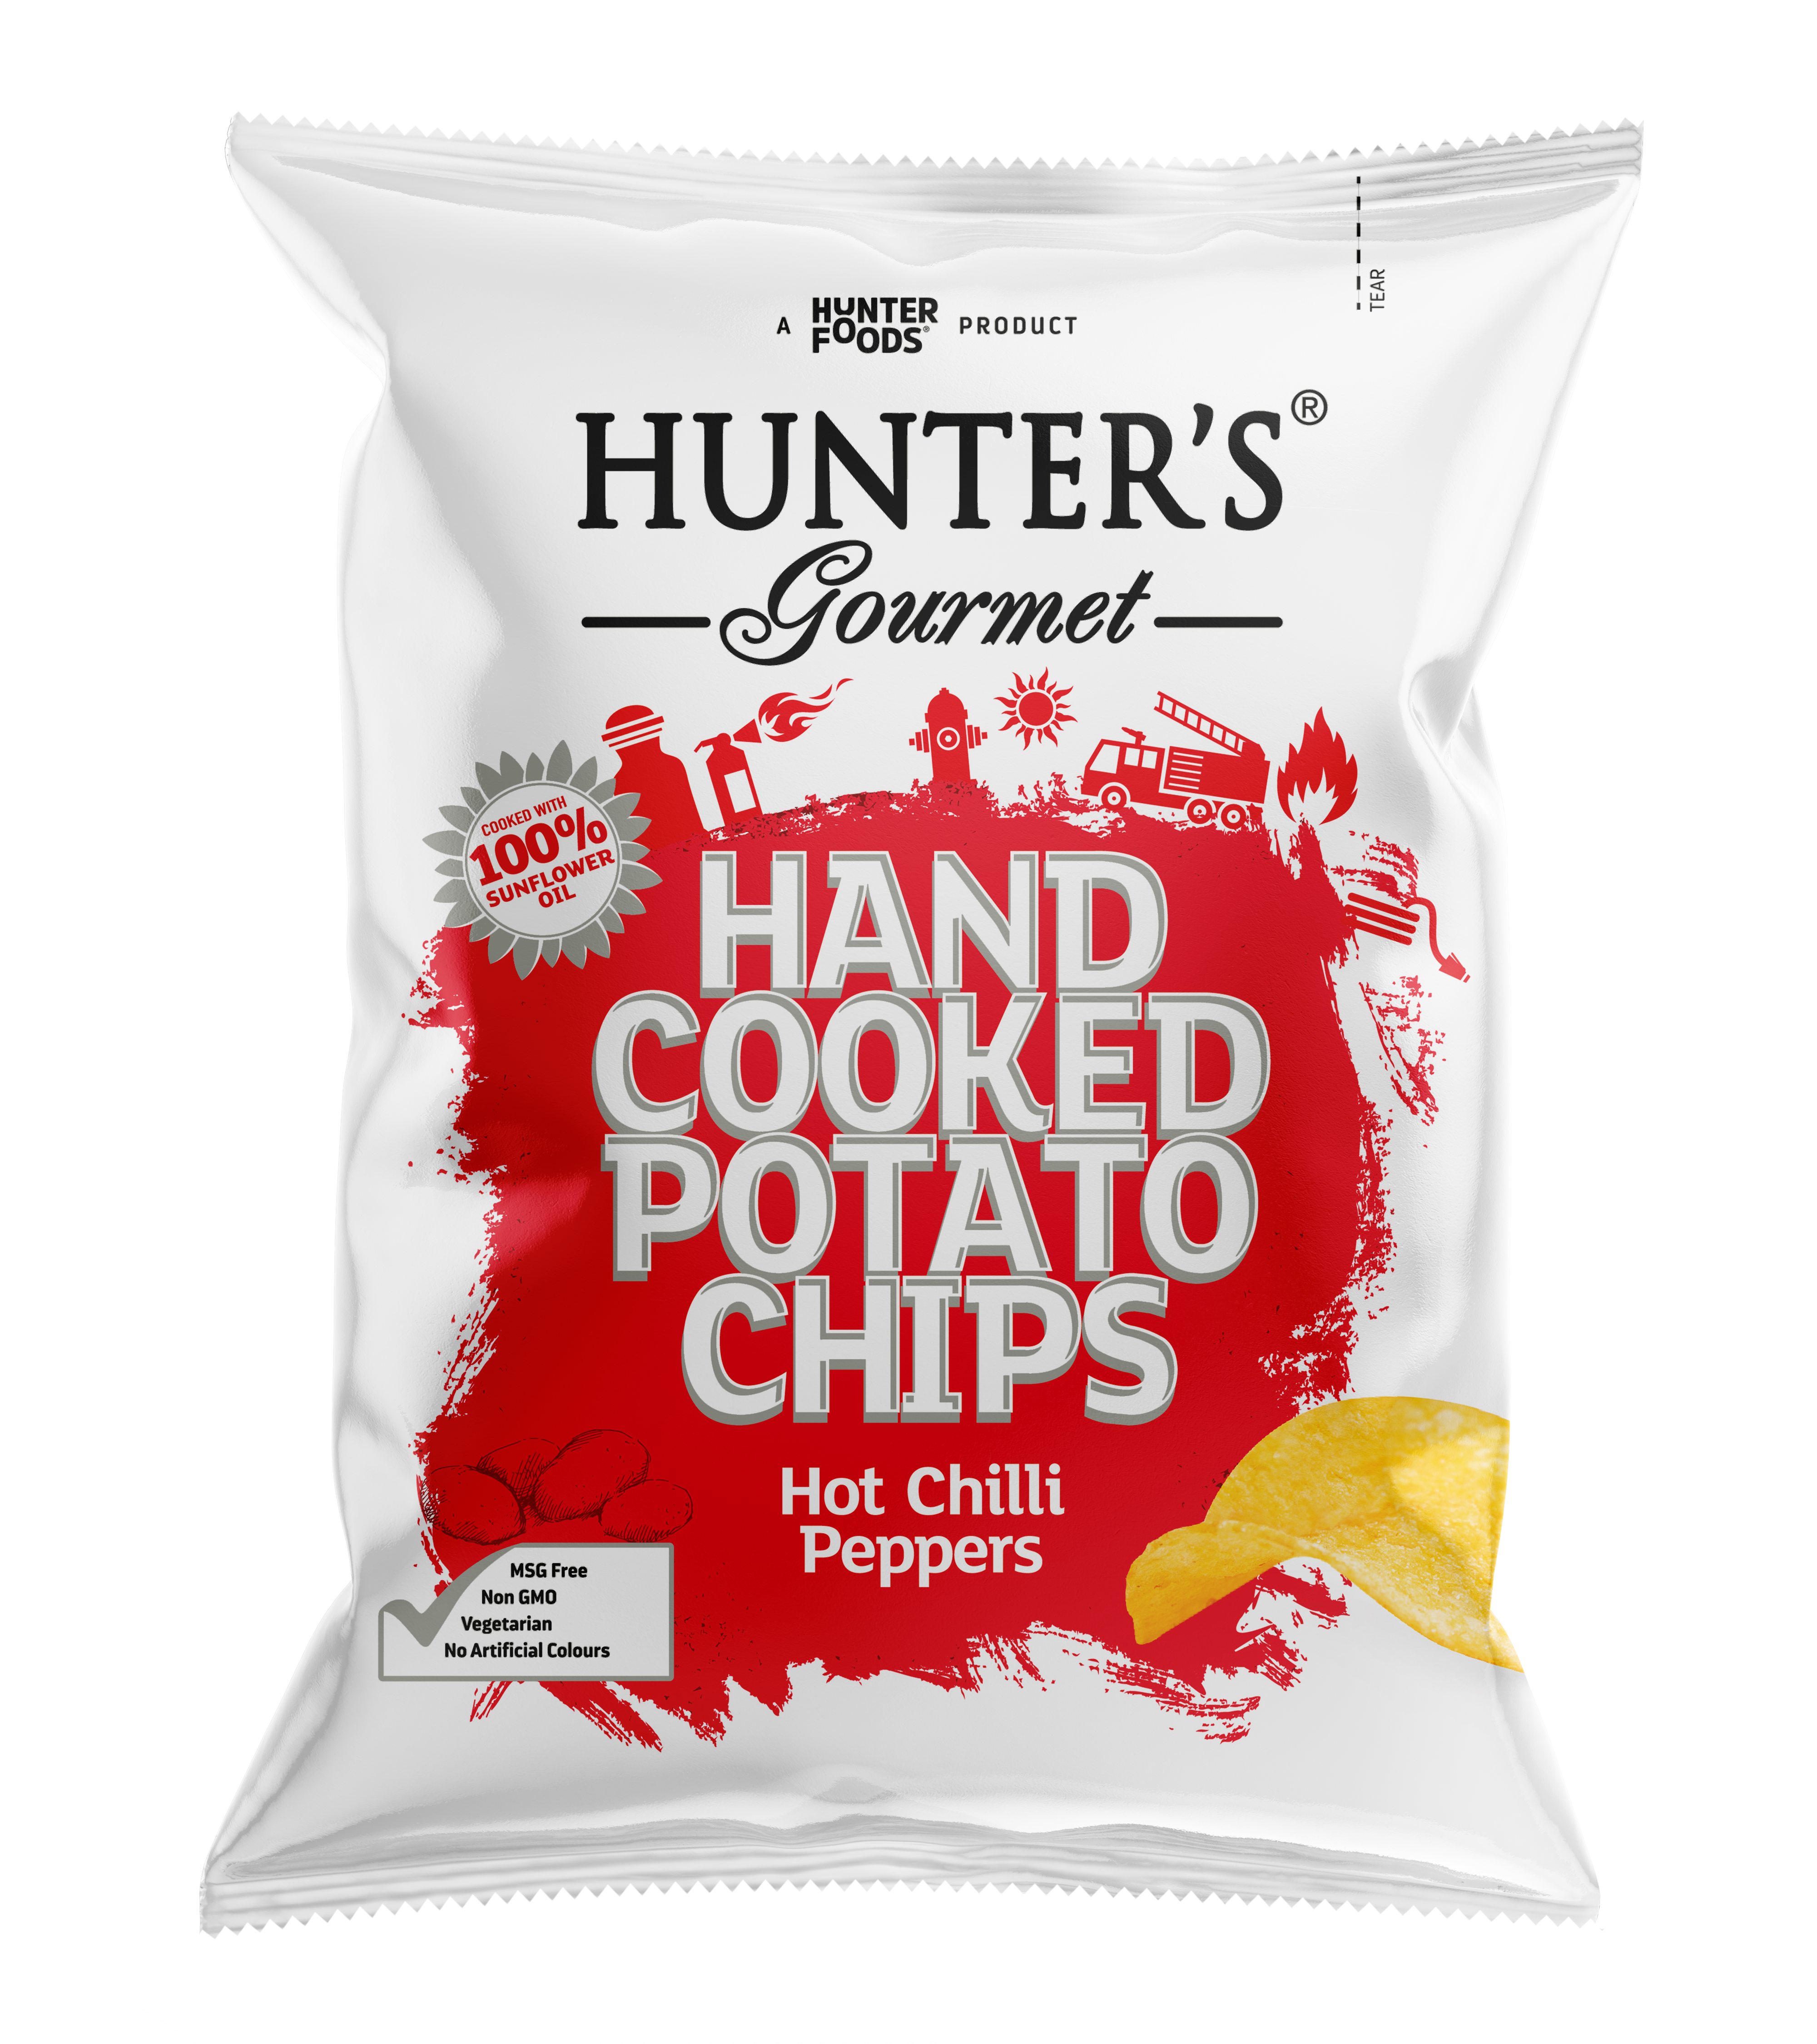 Hunter's Gourmet Hand Cooked Potato Chips Hot Chilli Peppers 12 units per case 125 g